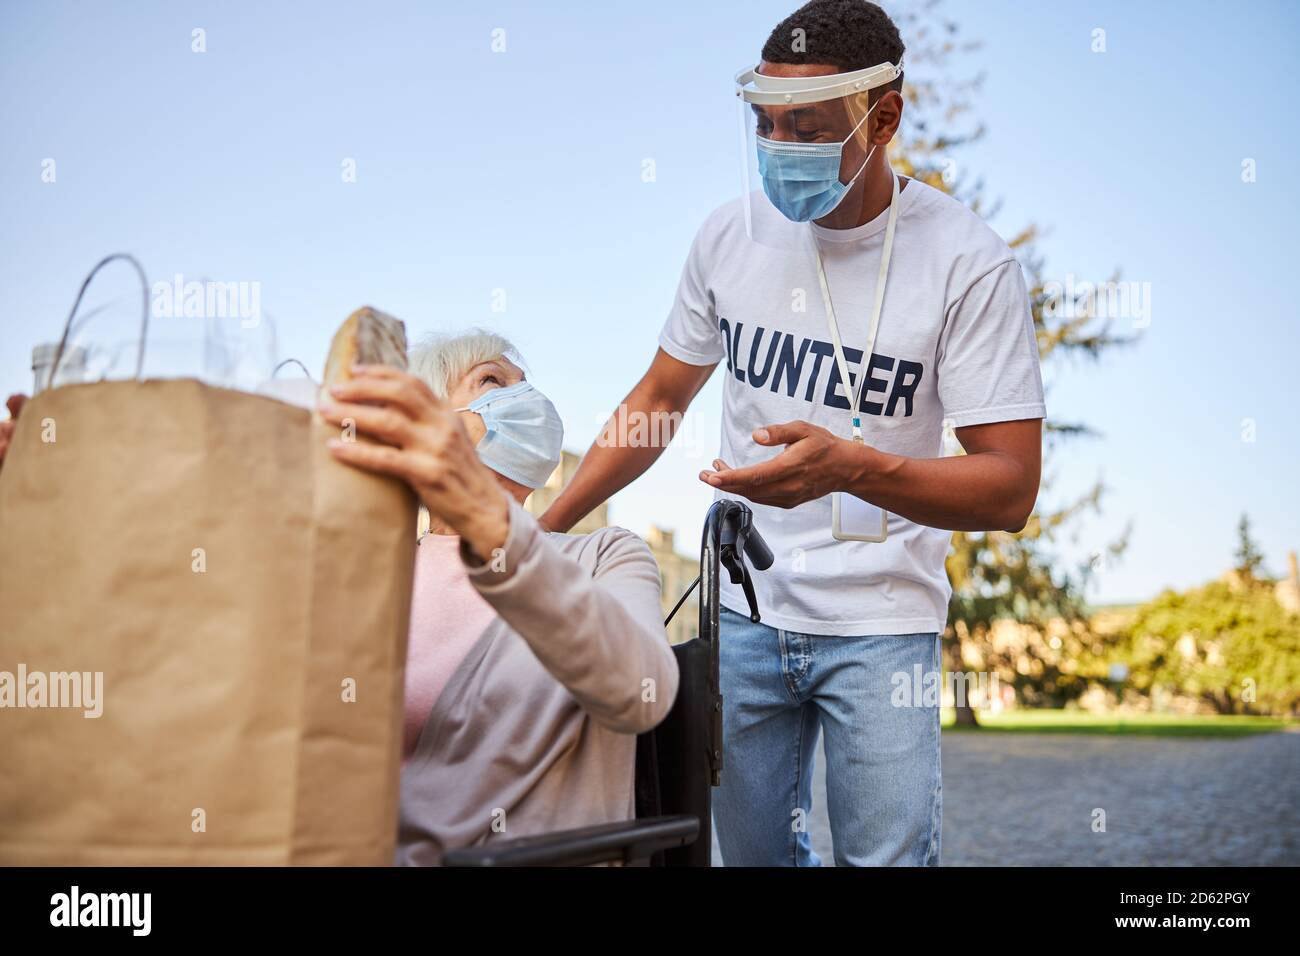 Friendly volunteer addressing aged woman with disability Stock Photo